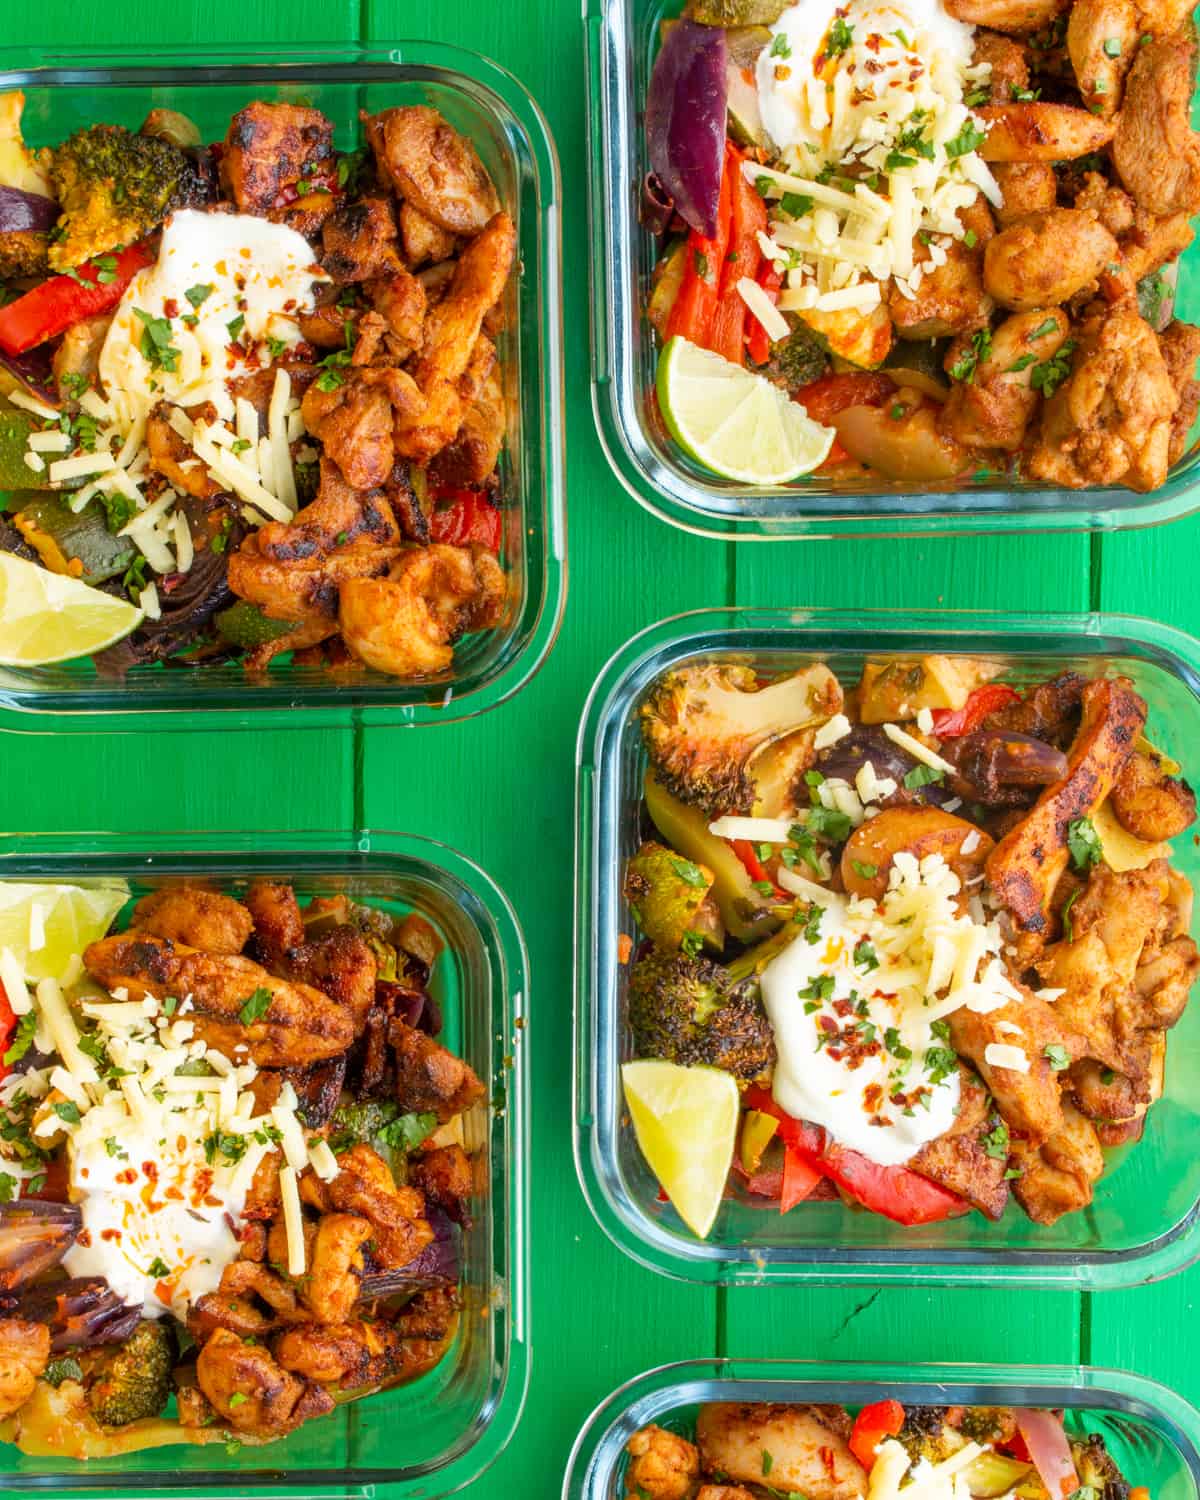 https://beatthebudget.com/wp-content/uploads/2021/02/Low-Carb-Mexican-Meal-Prep-Insta.jpg